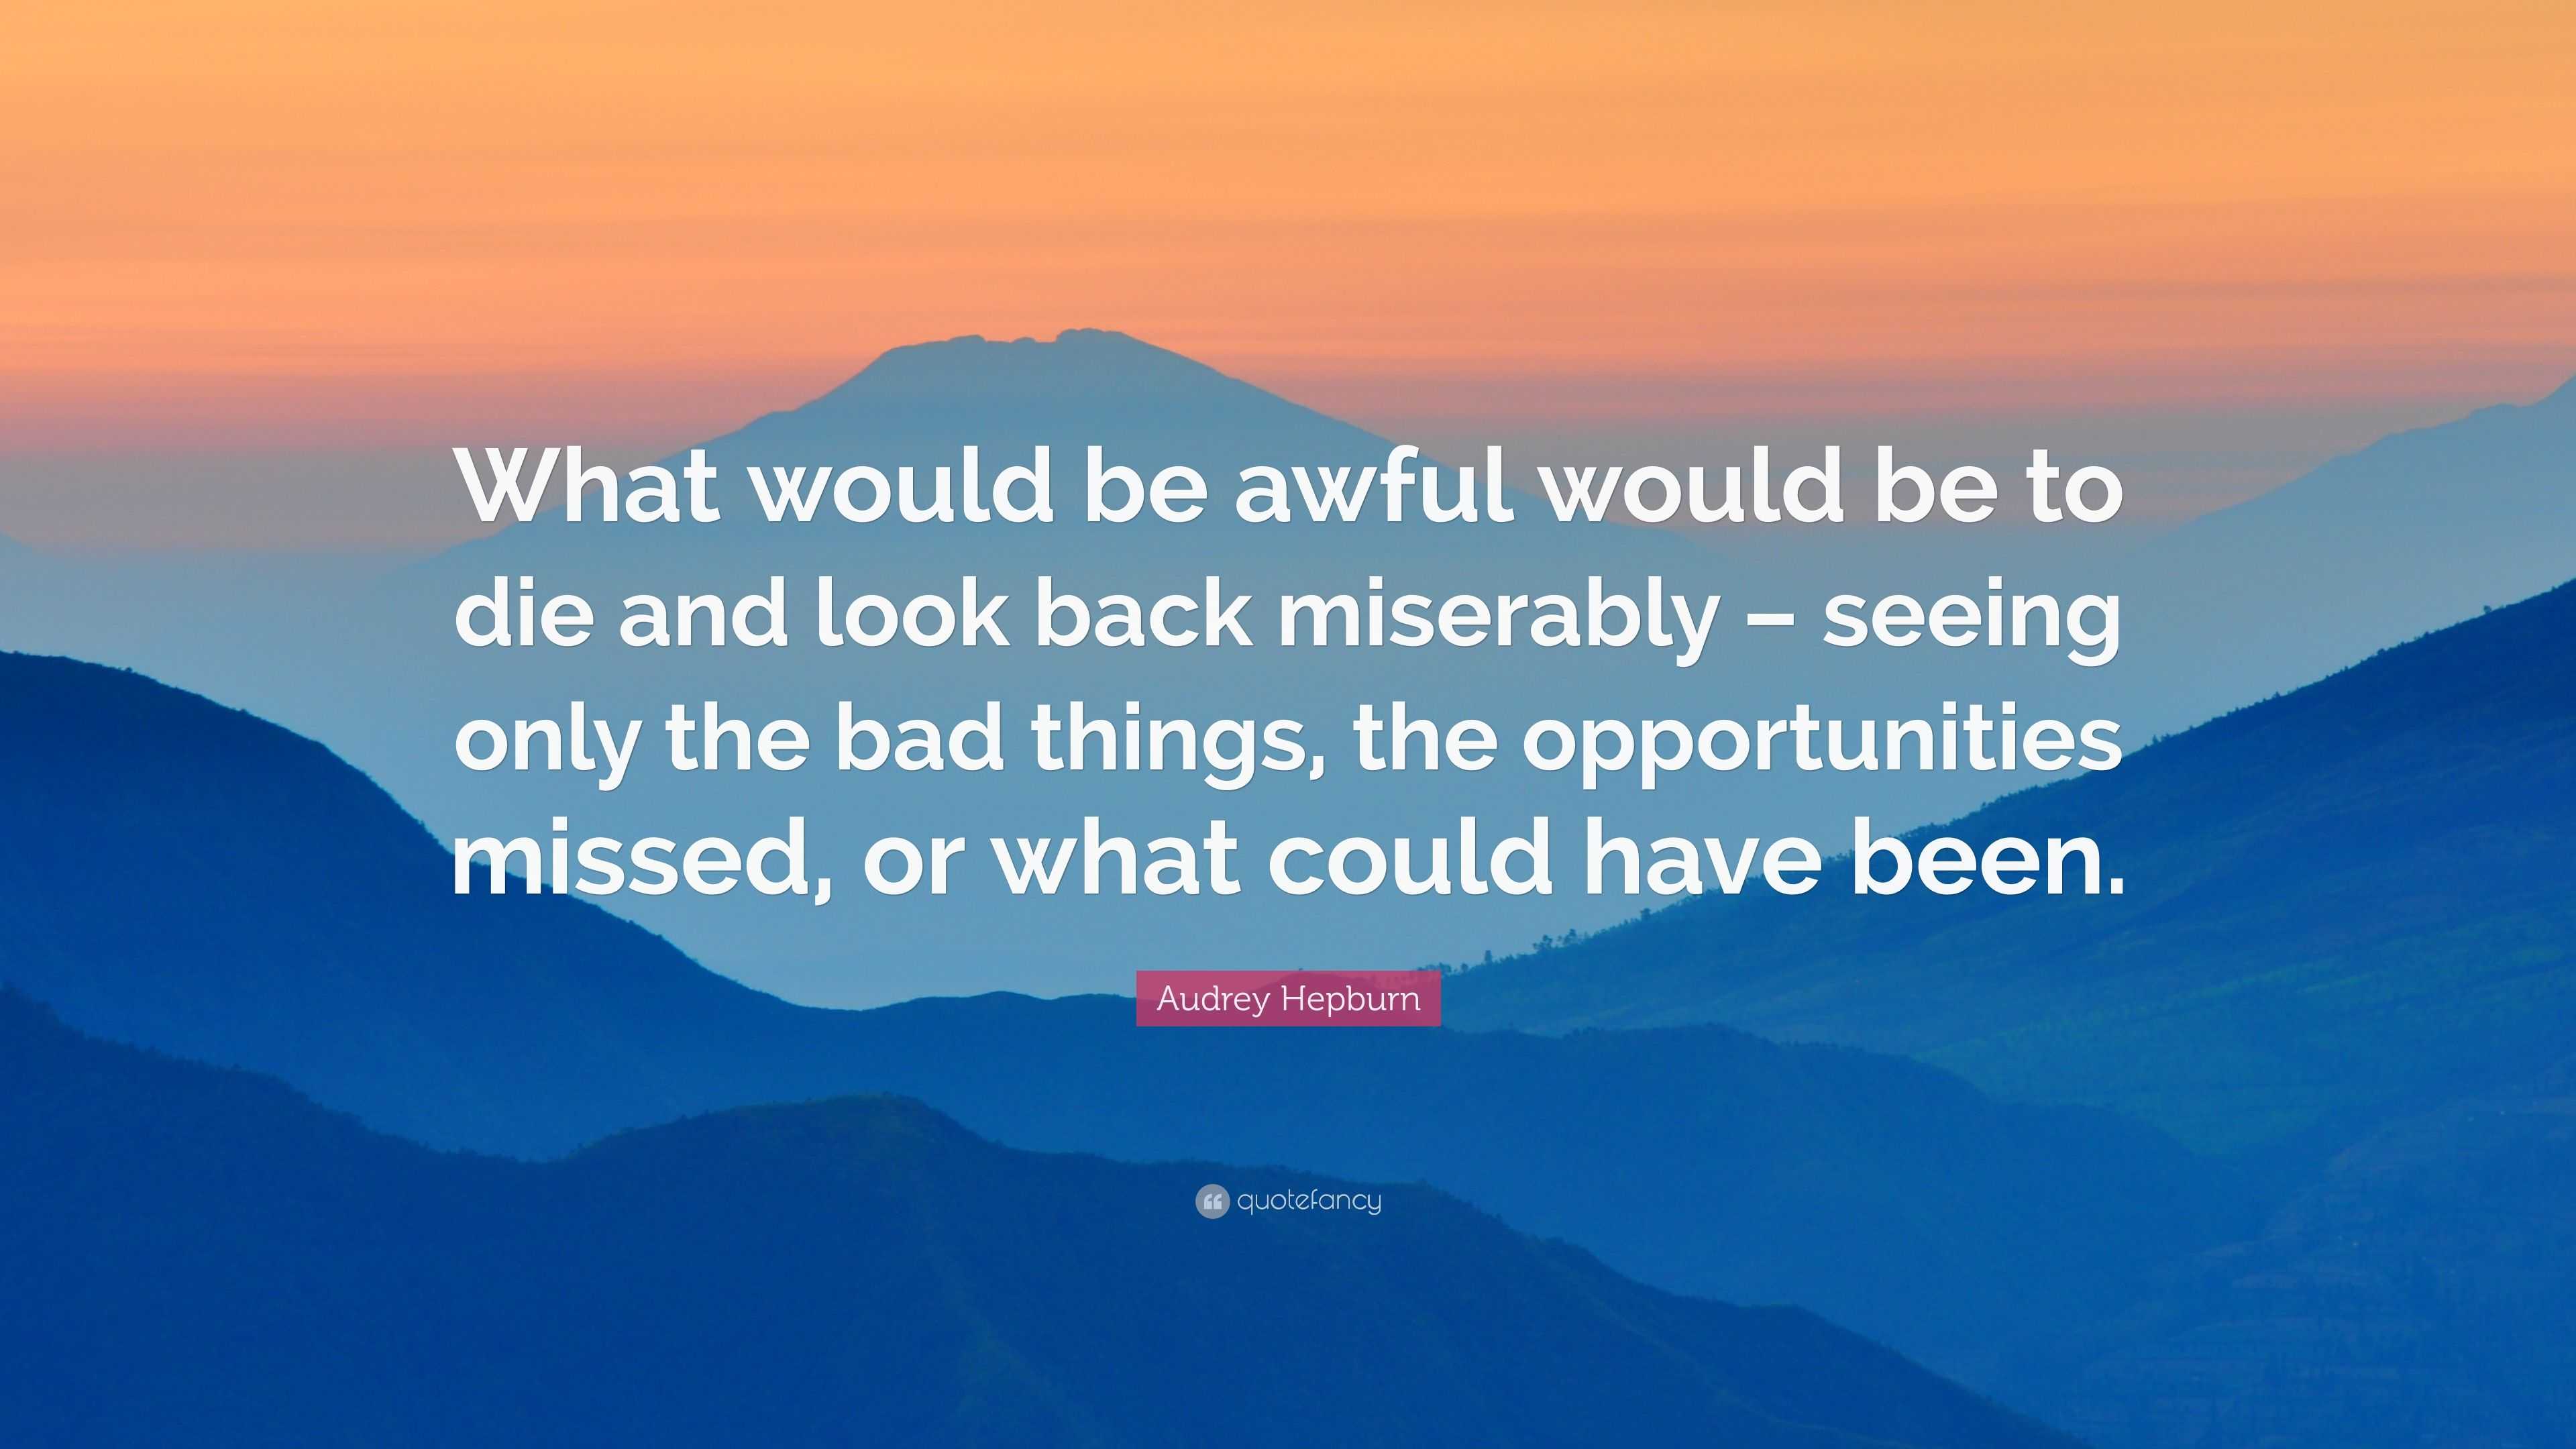 Audrey Hepburn Quote: “What would be awful would be to die and look ...